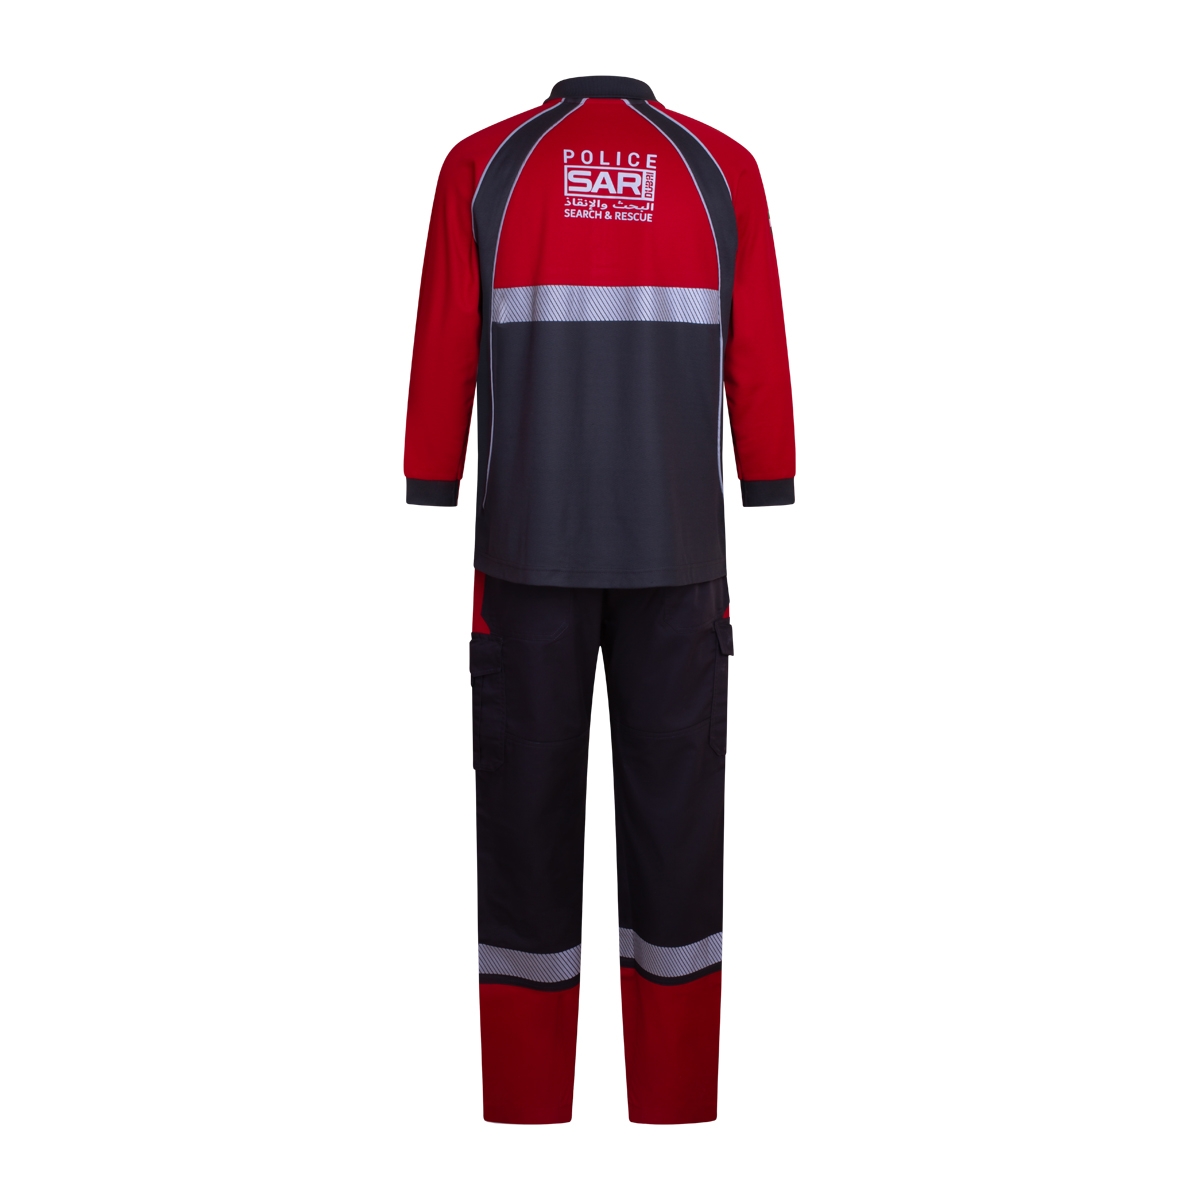 Police Search and rescue Uniform back